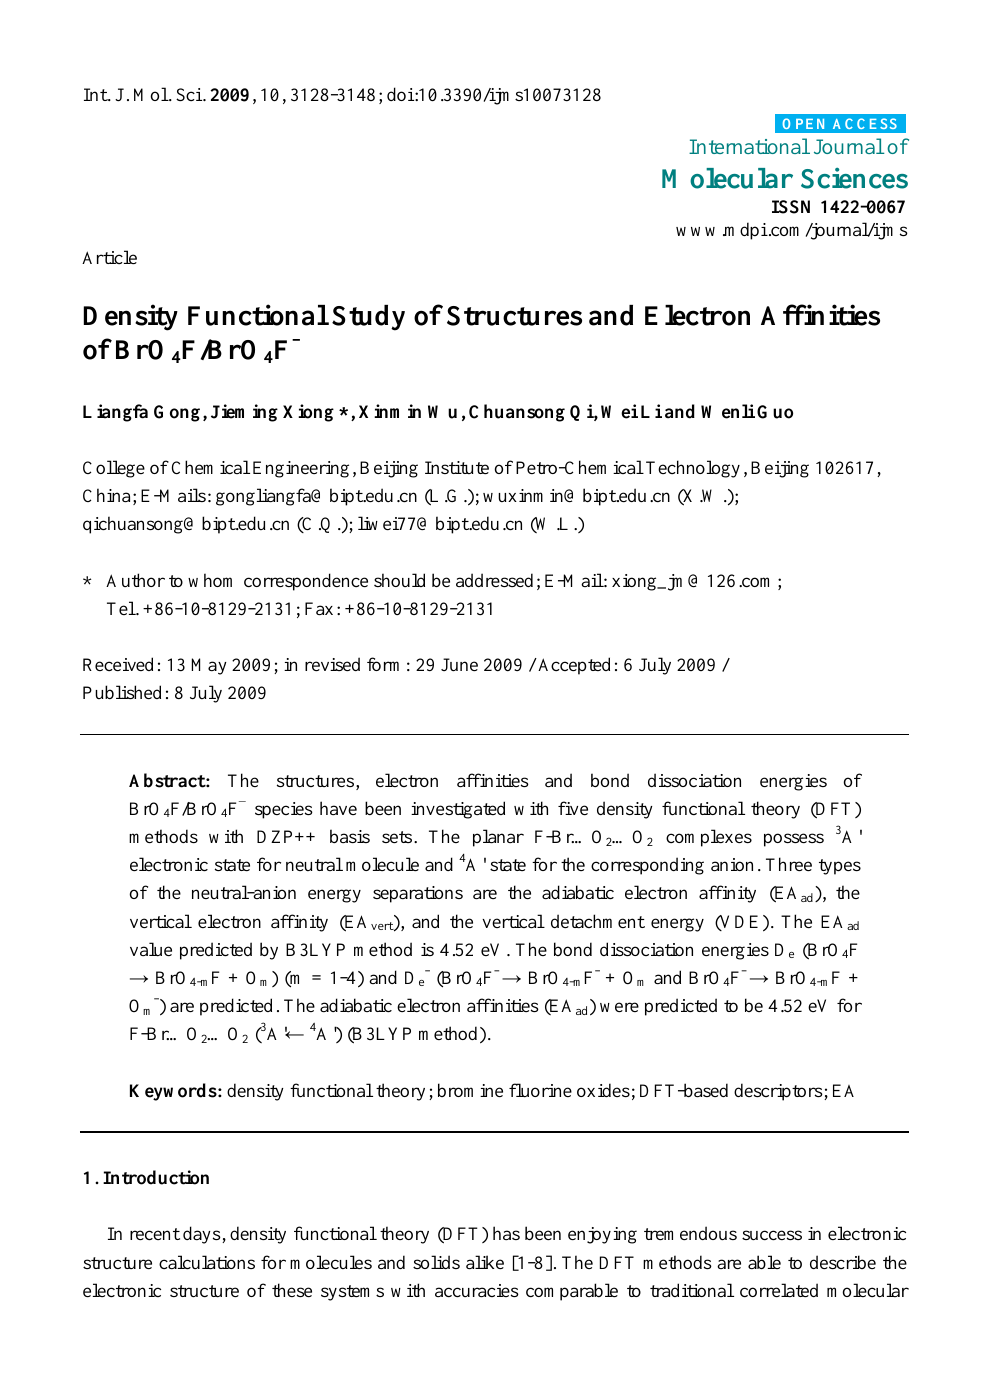 Density Functional Study Of Structures And Electron Affinities Of Bro4f Bro4f Topic Of Research Paper In Chemical Sciences Download Scholarly Article Pdf And Read For Free On Cyberleninka Open Science Hub